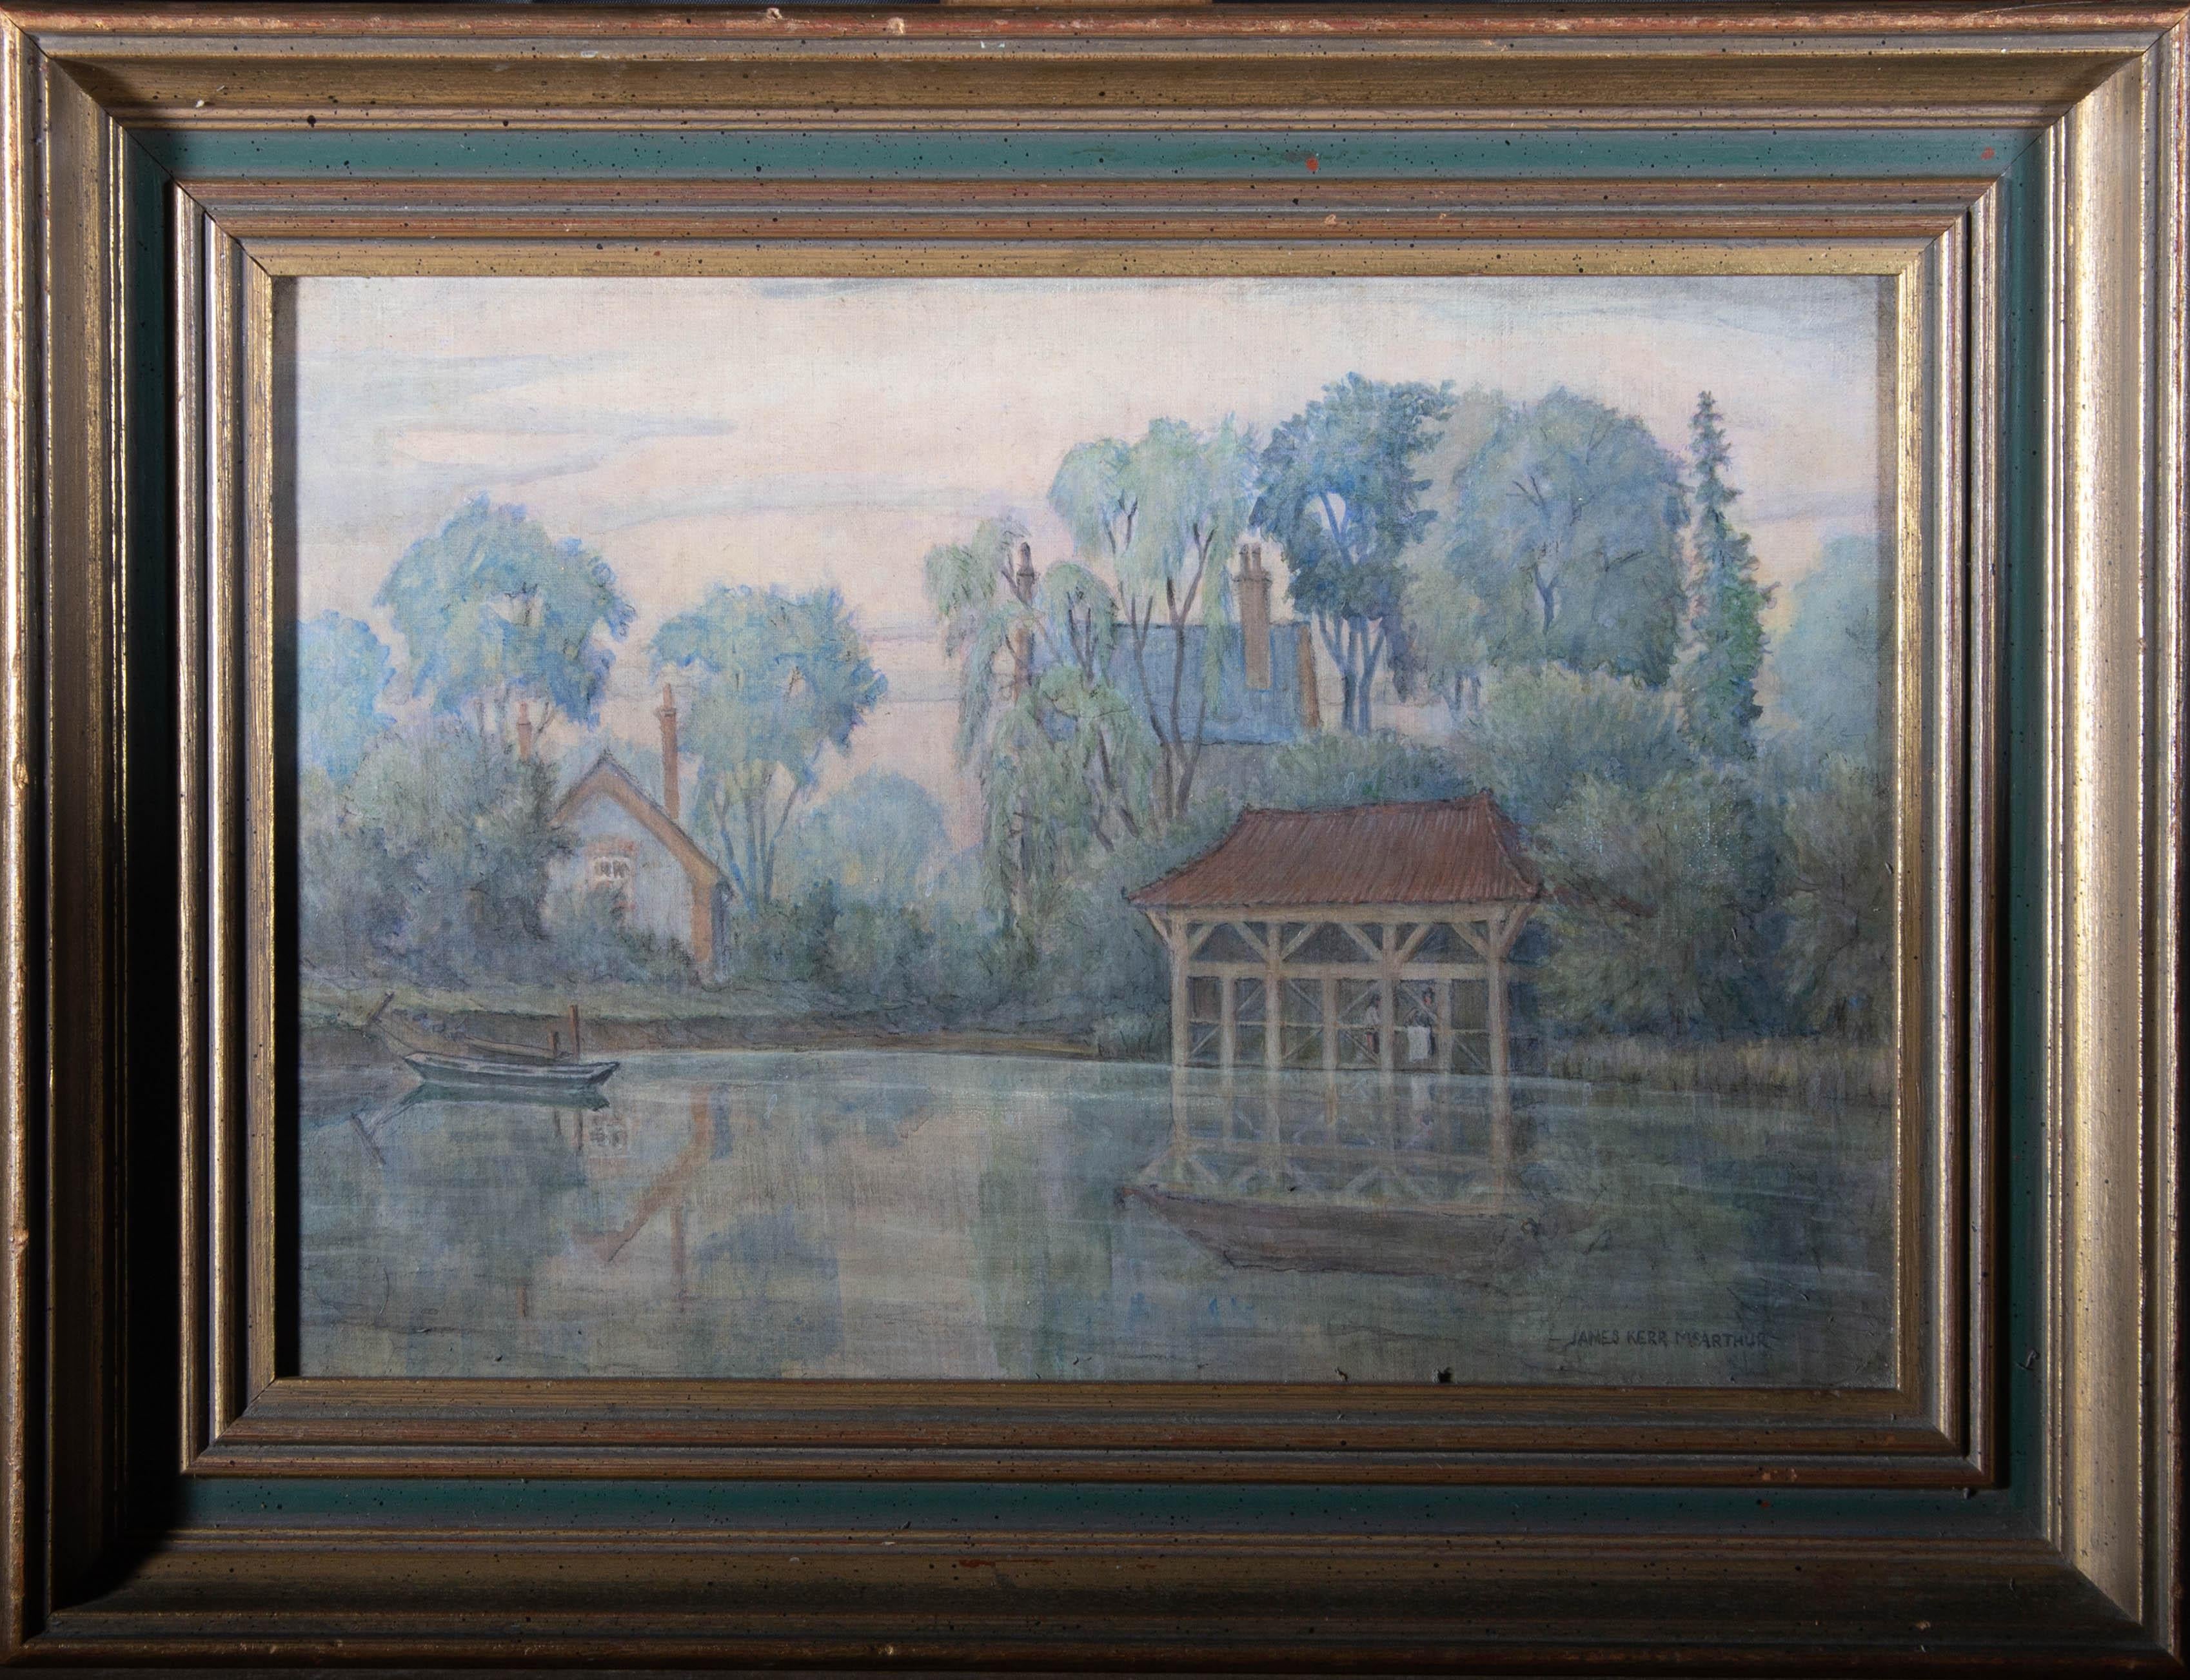 A dream like, impressionist river scene showing a wooden boat house on the water of the Seine at Clerey in France. The artist has captured a beautiful blushing dusk with great delicacy and the figures seen in the boat house add intrigue and